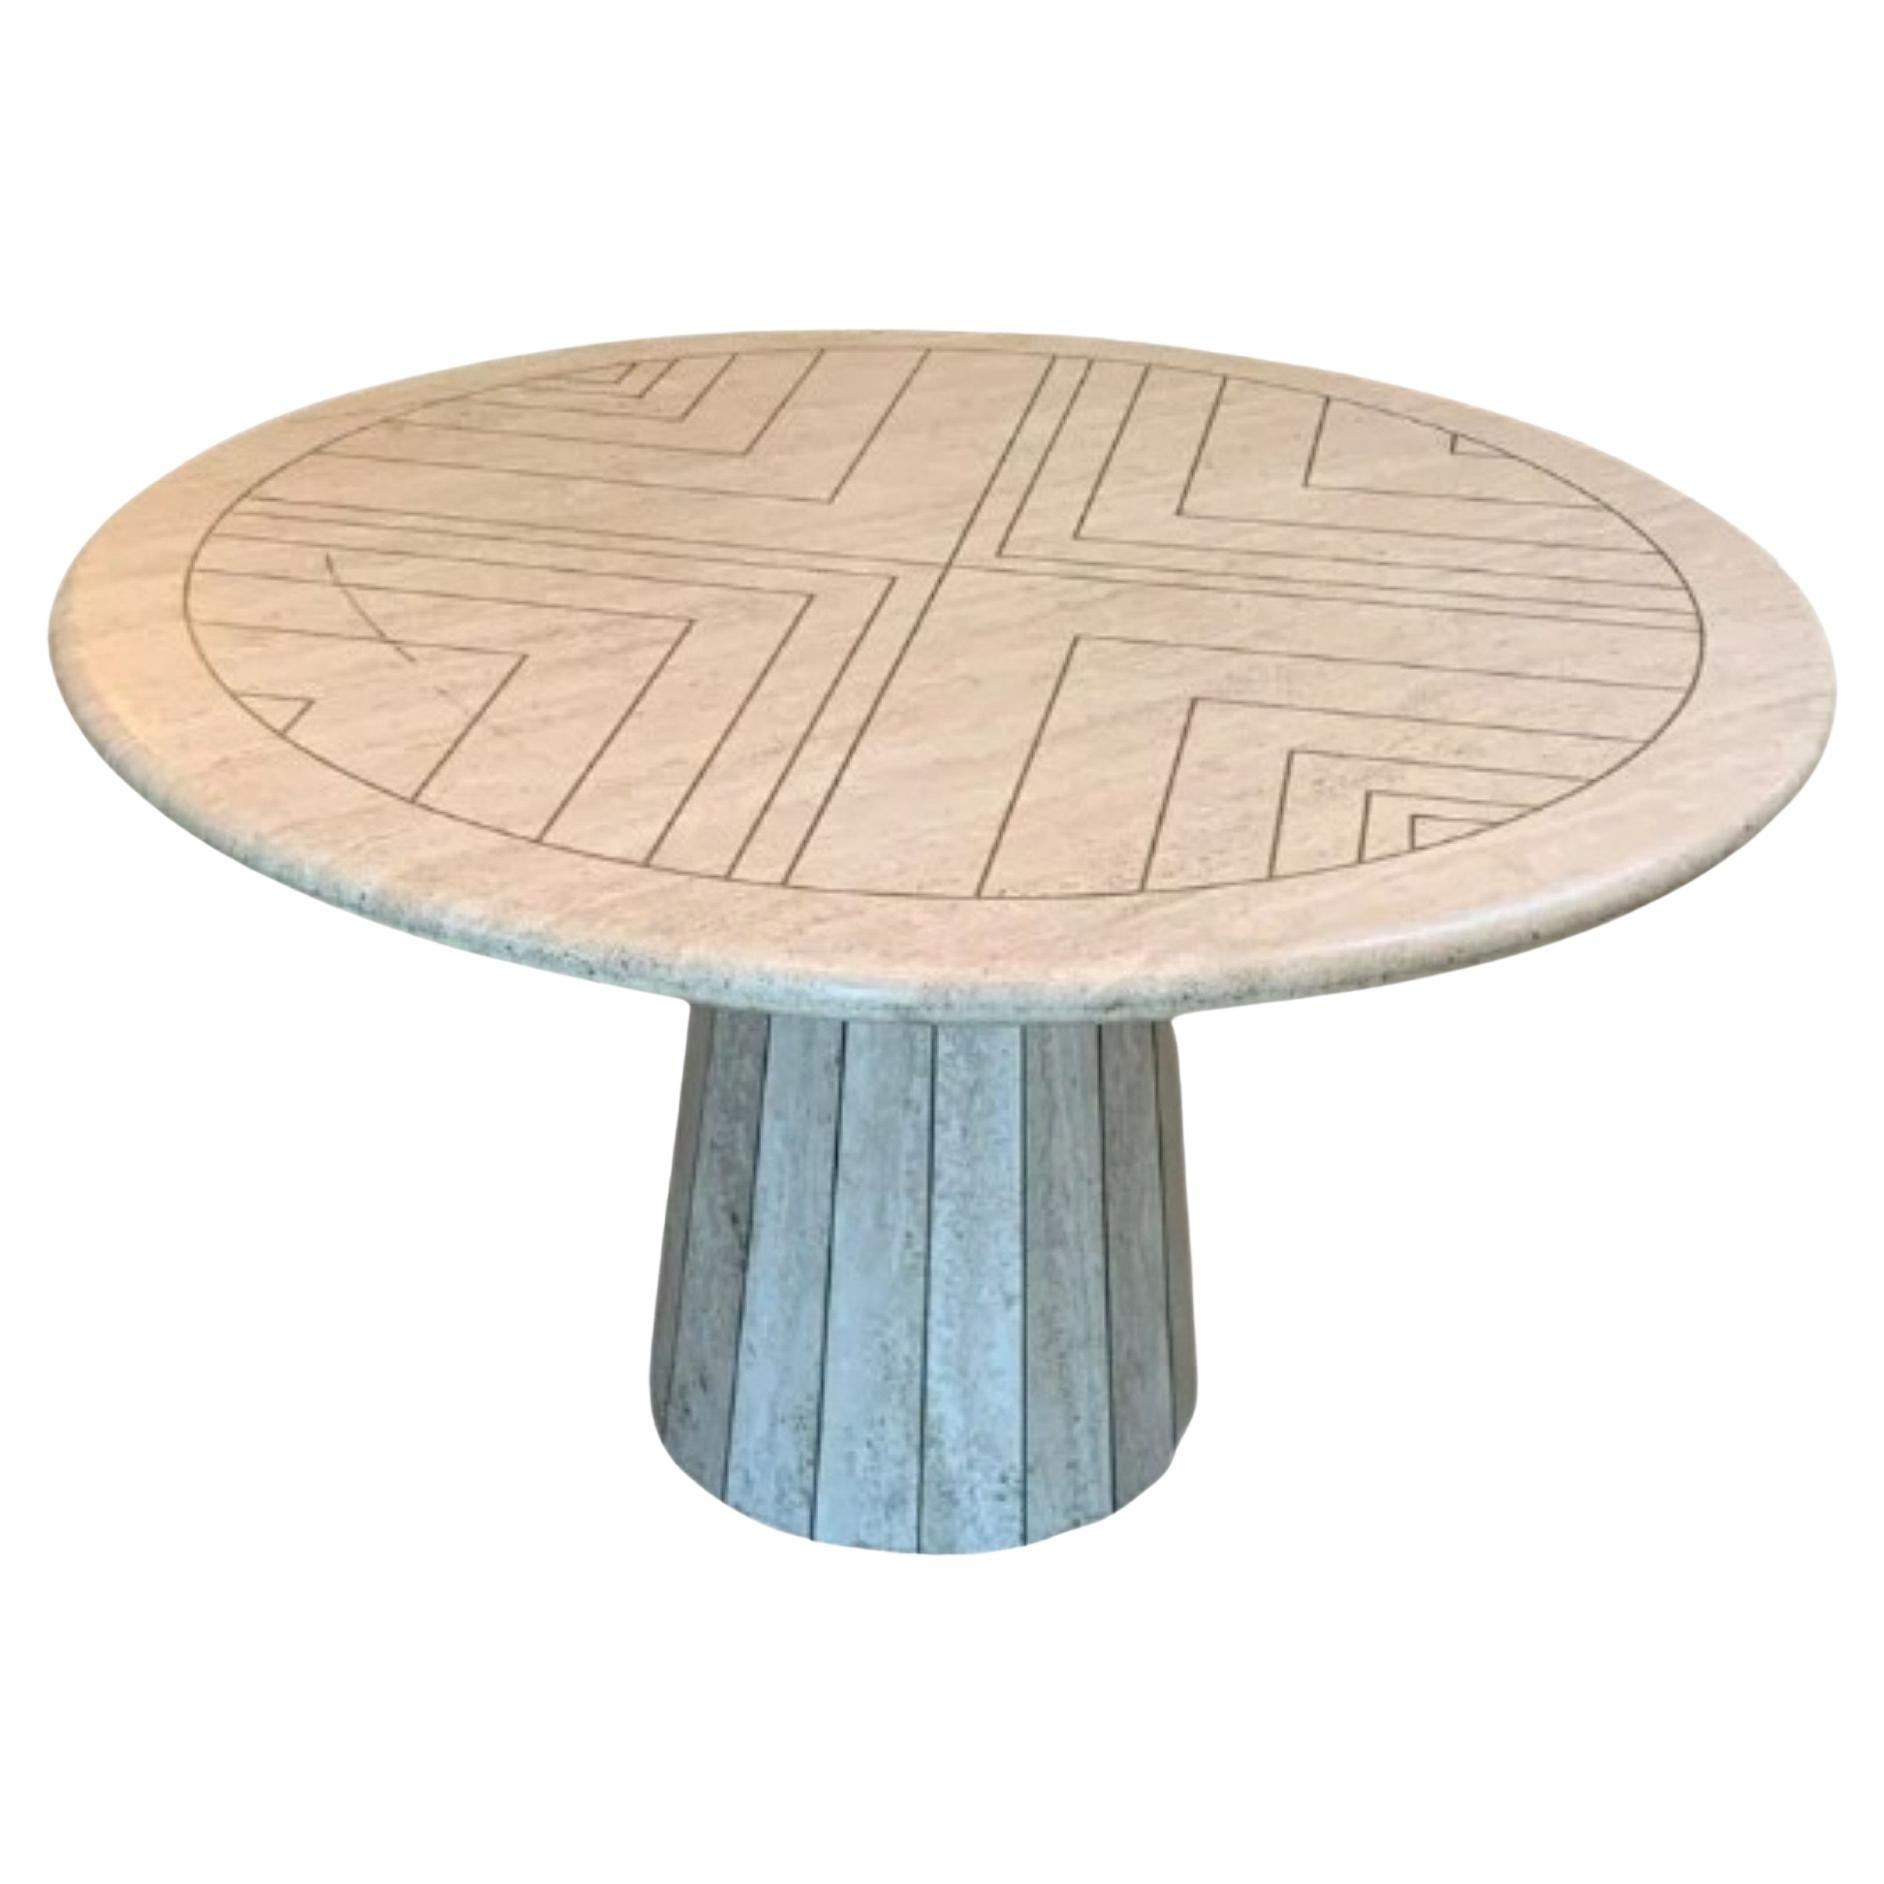 Midcentury Travertine Round Dining Table Attributed to Willy Rizzo, Italian, 70s For Sale